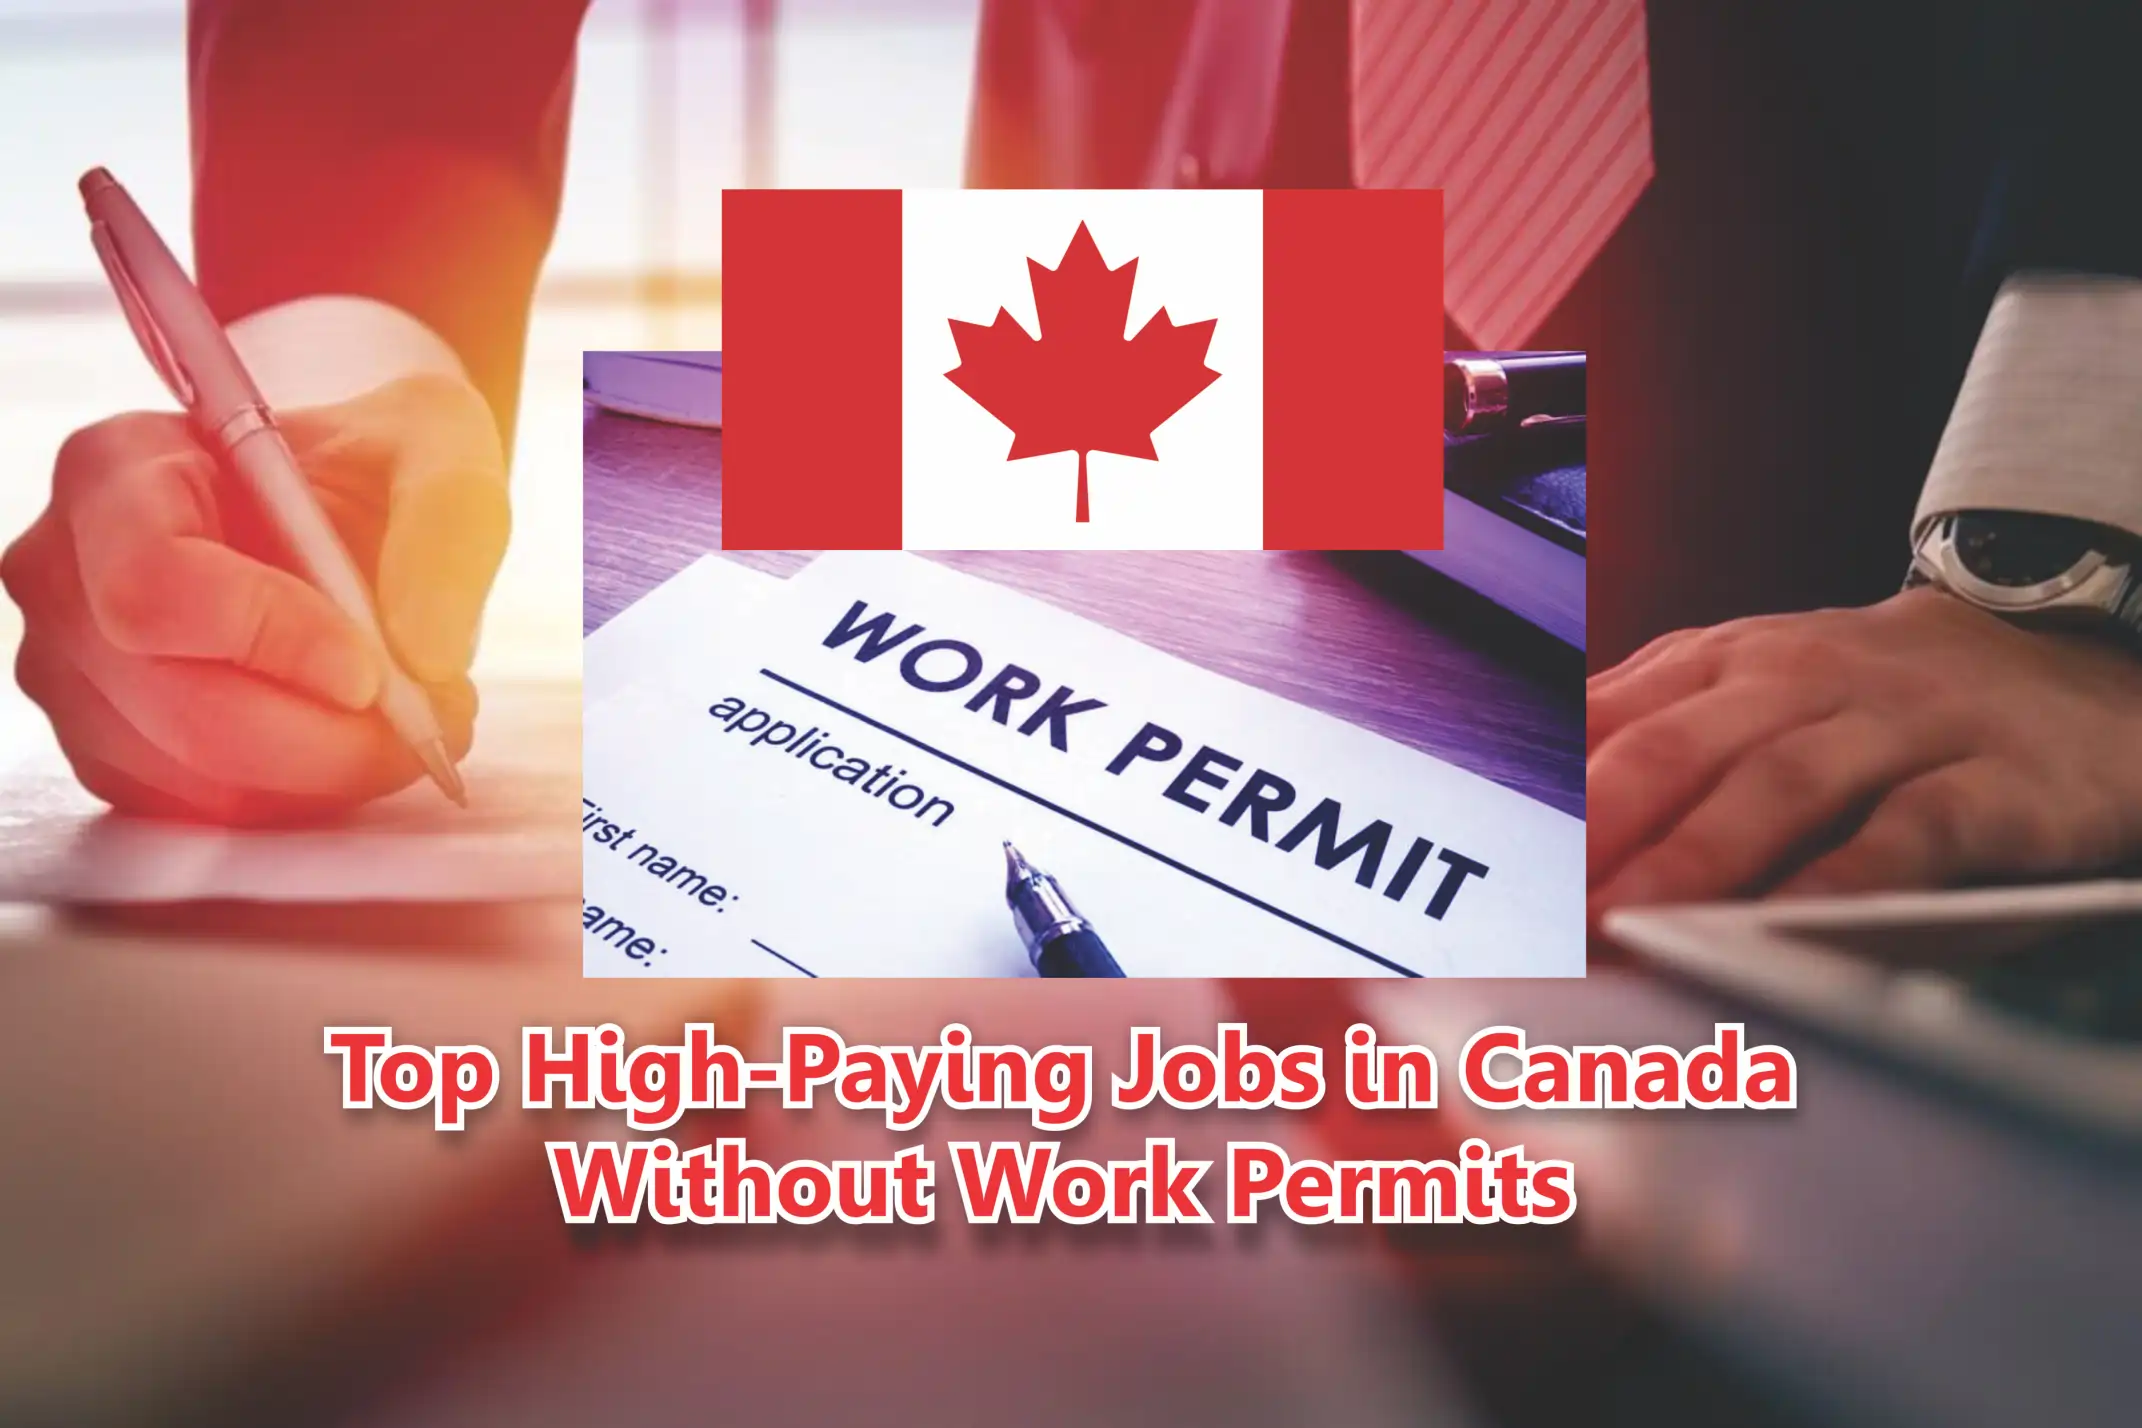 Top High-Paying Jobs in Canada Without Work Permits